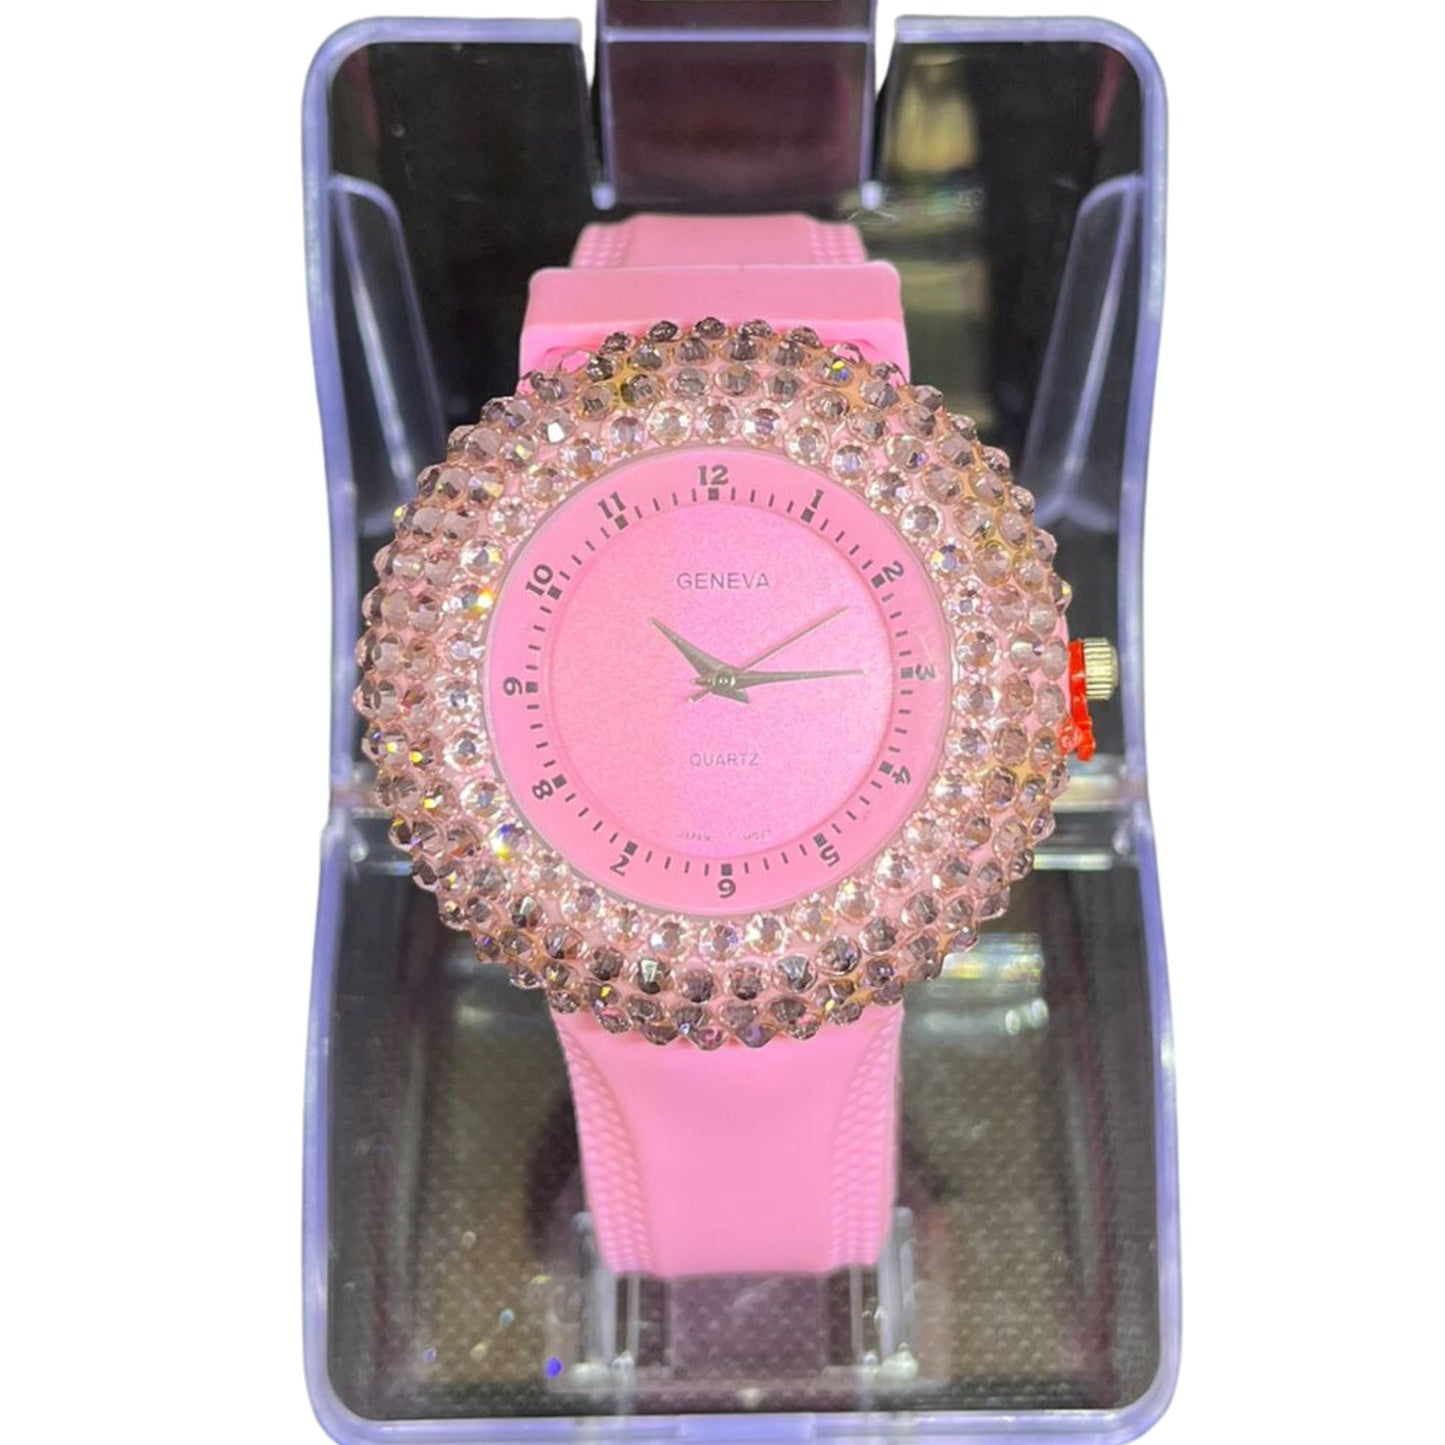 BBG Women's Watch with Pink Lining, Pink Color, 1 Pc per Pack